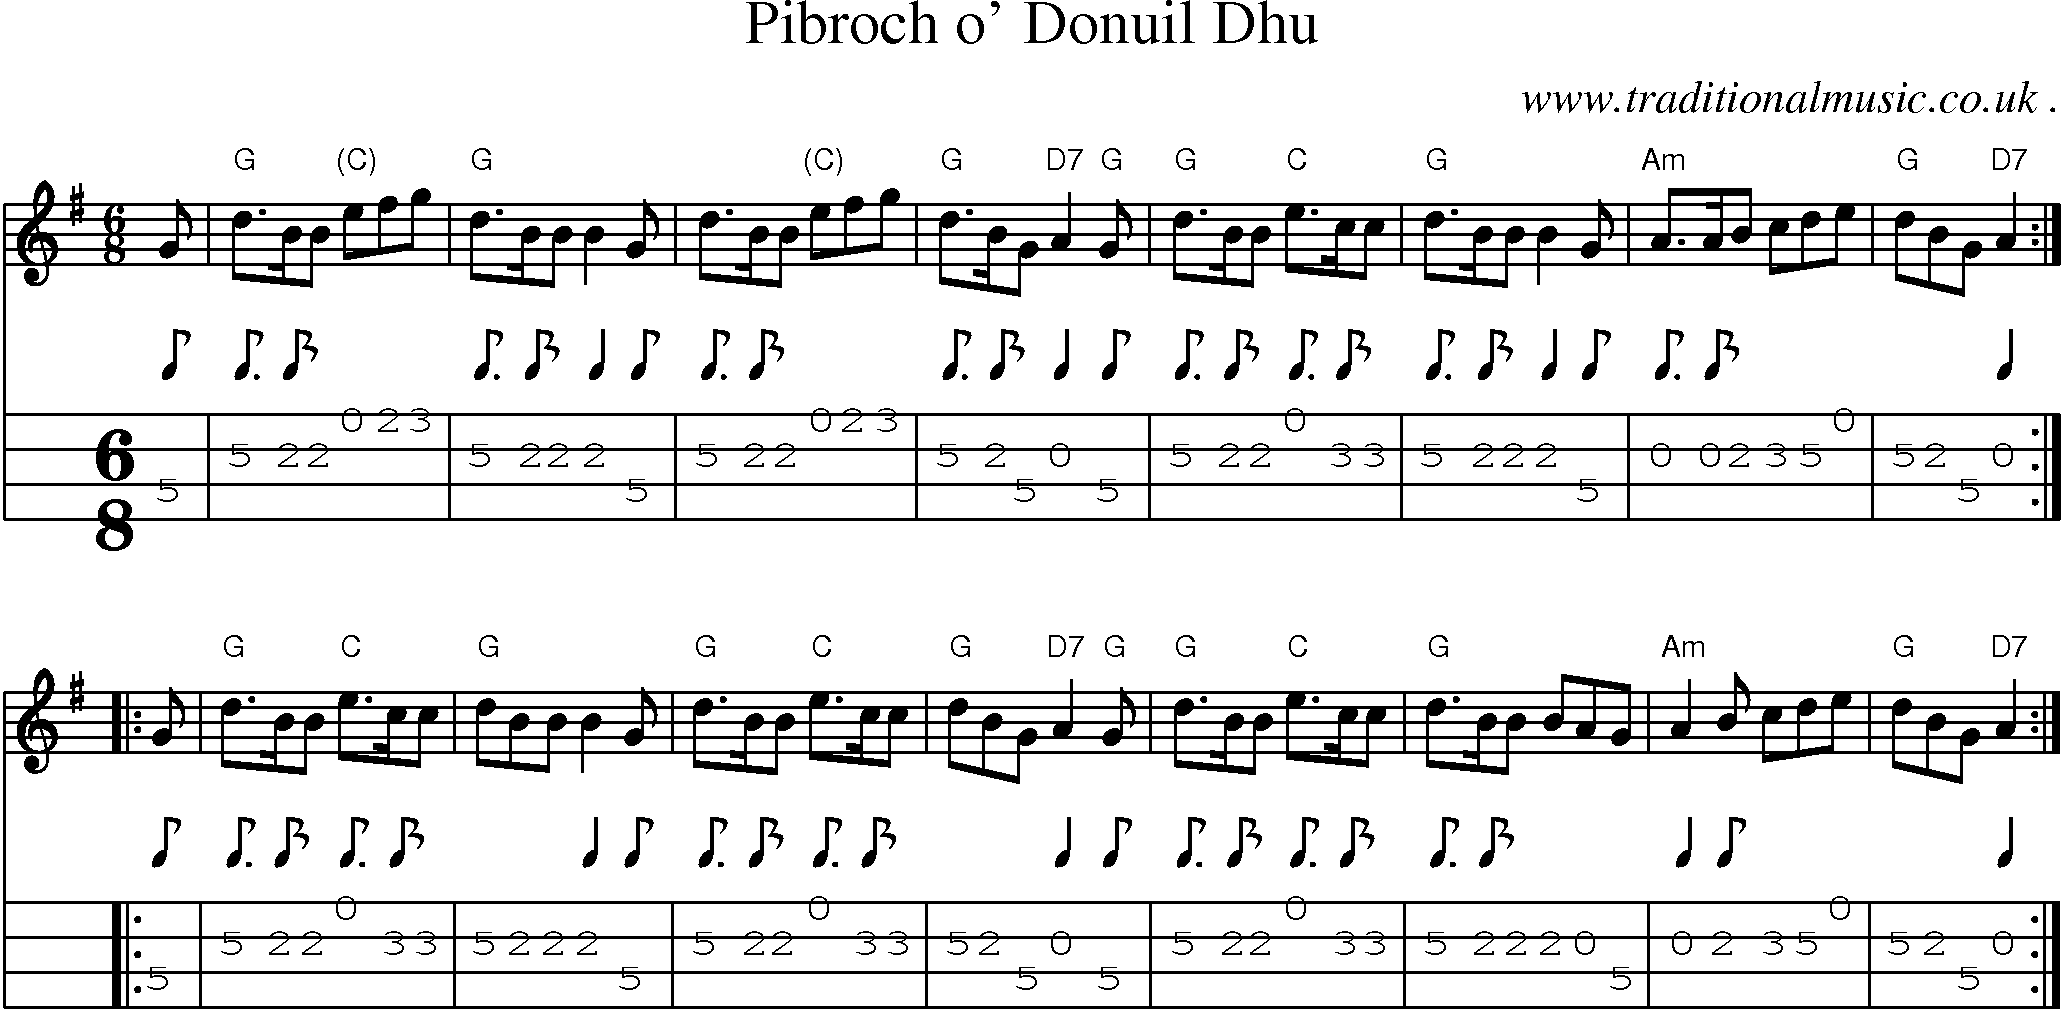 Sheet-music  score, Chords and Mandolin Tabs for Pibroch O Donuil Dhu